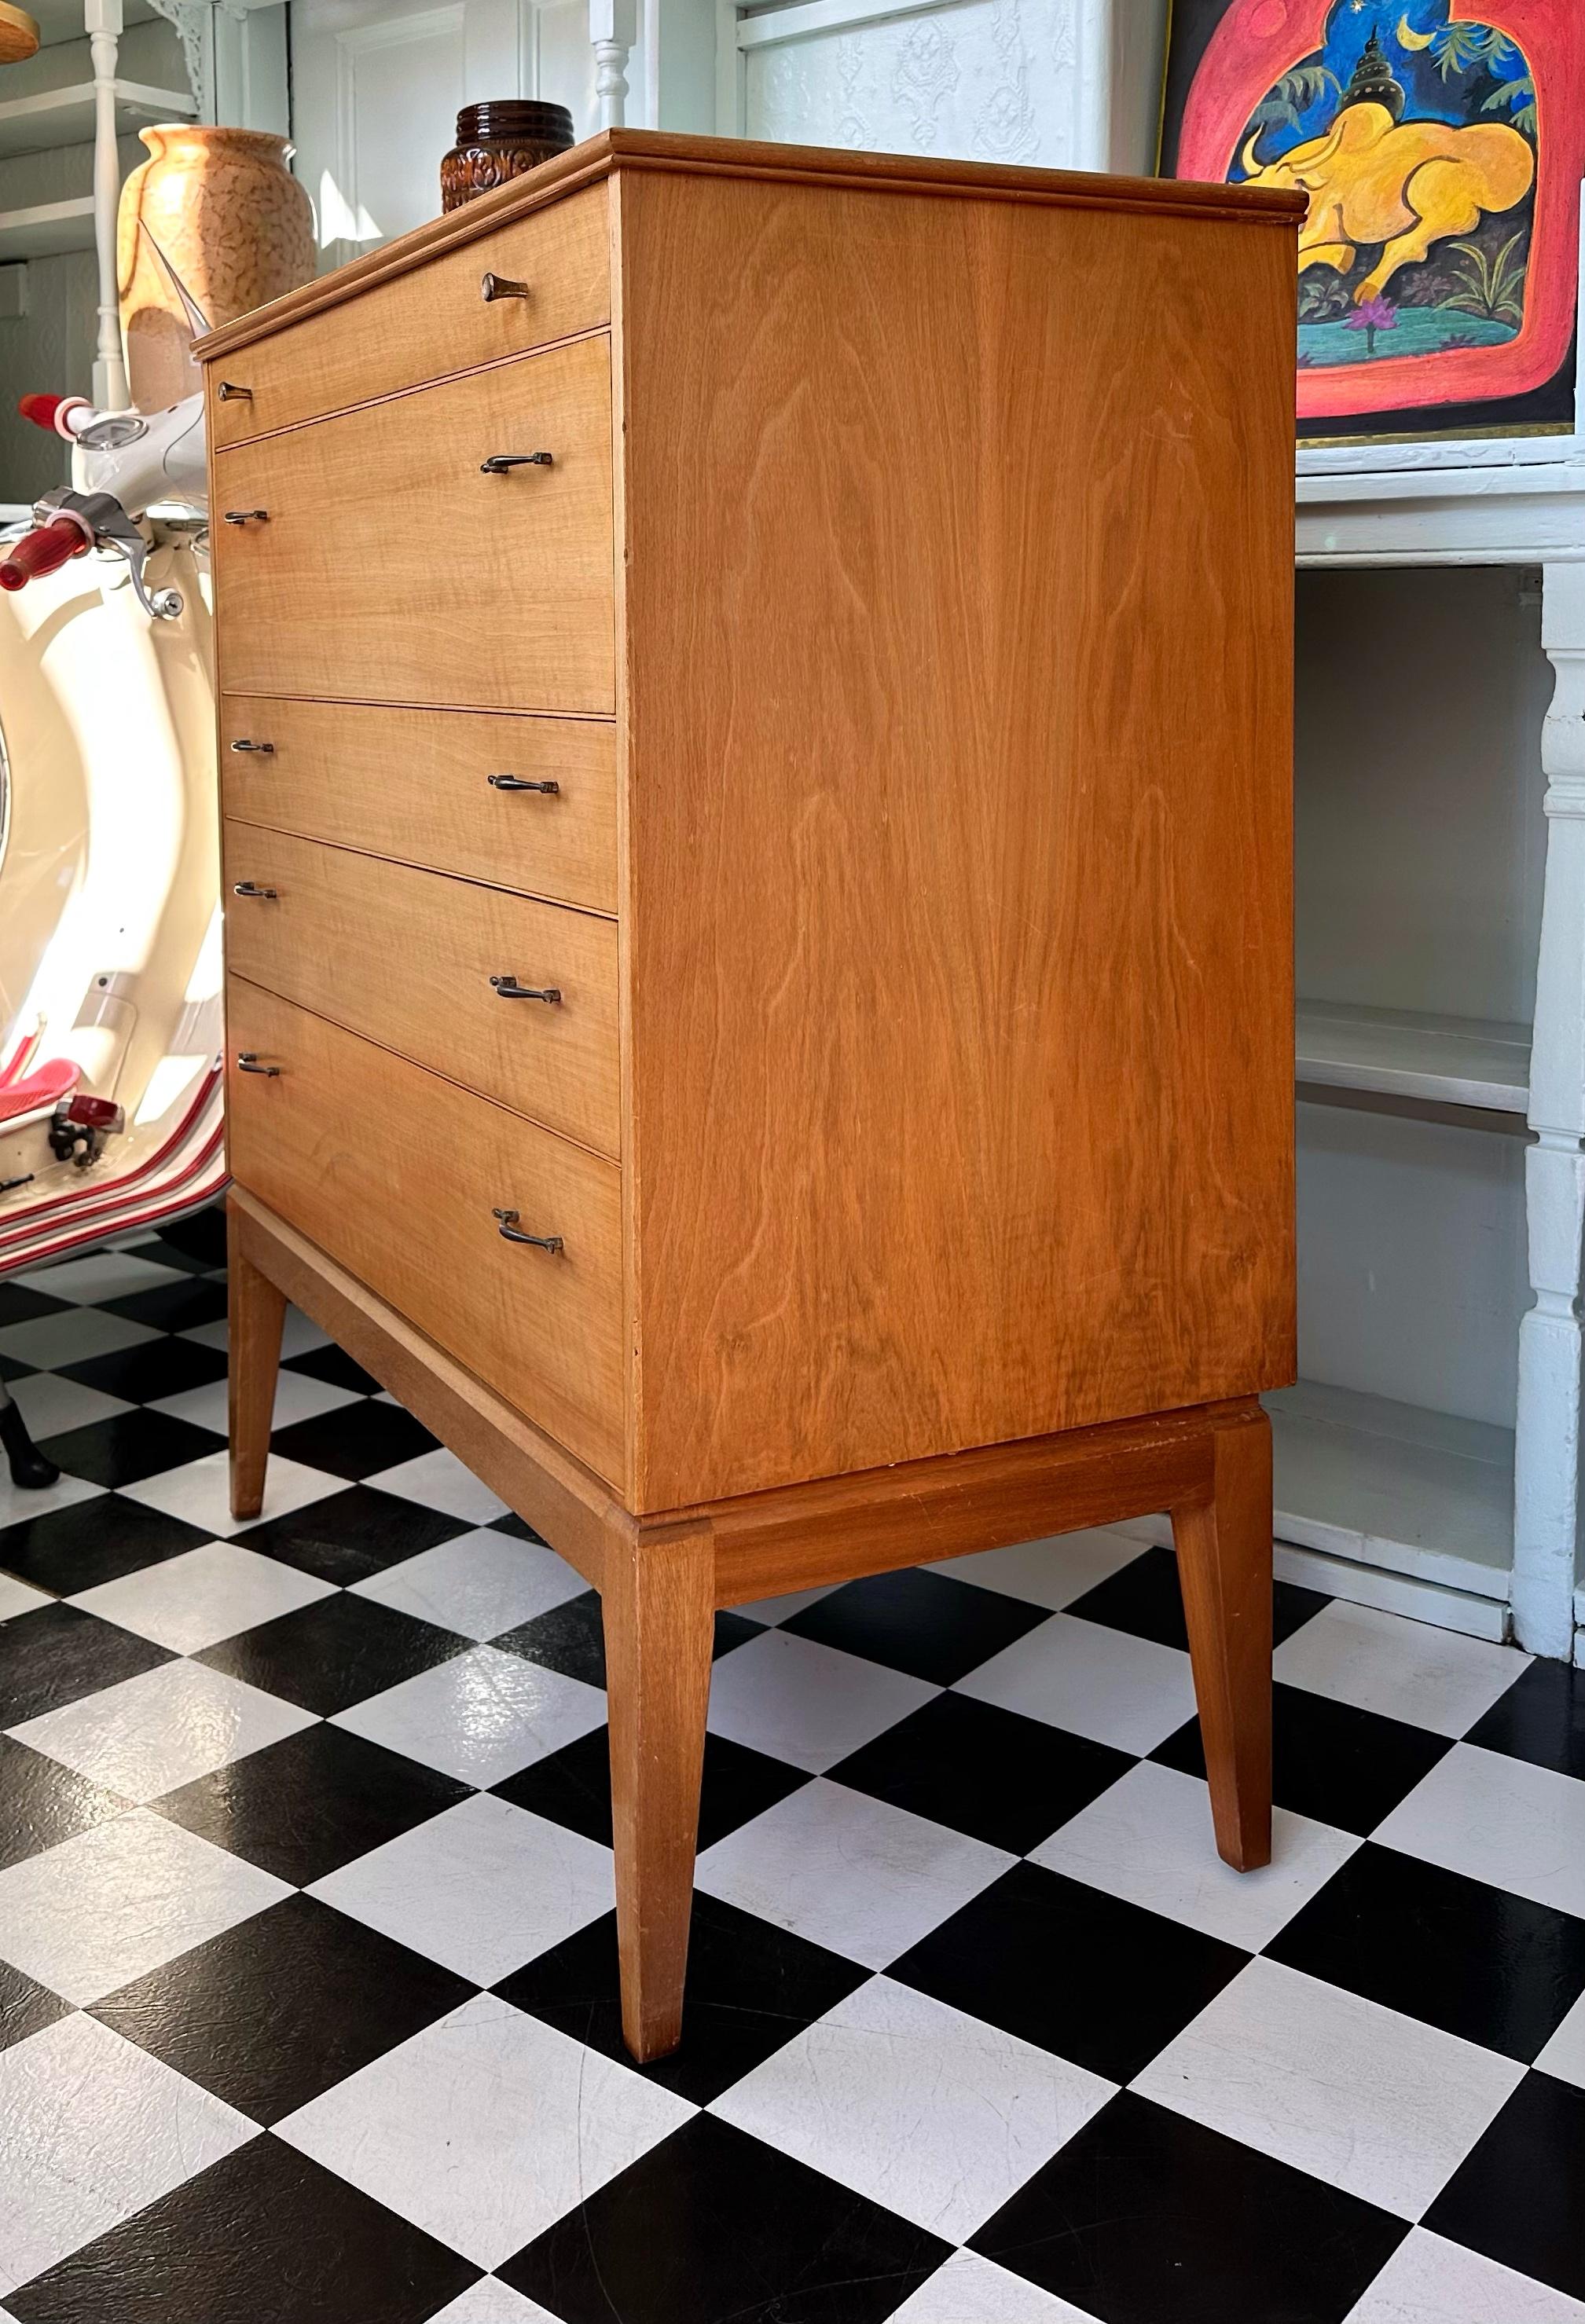 Very rare Mid Century modern teak and walnut tall chest of drawers. Designed in 1960s by the renowned and highly collectible cabinet maker Alfred Cox of Great Britain. Features five spacious drawers with stylish metal handles and stunning splayed